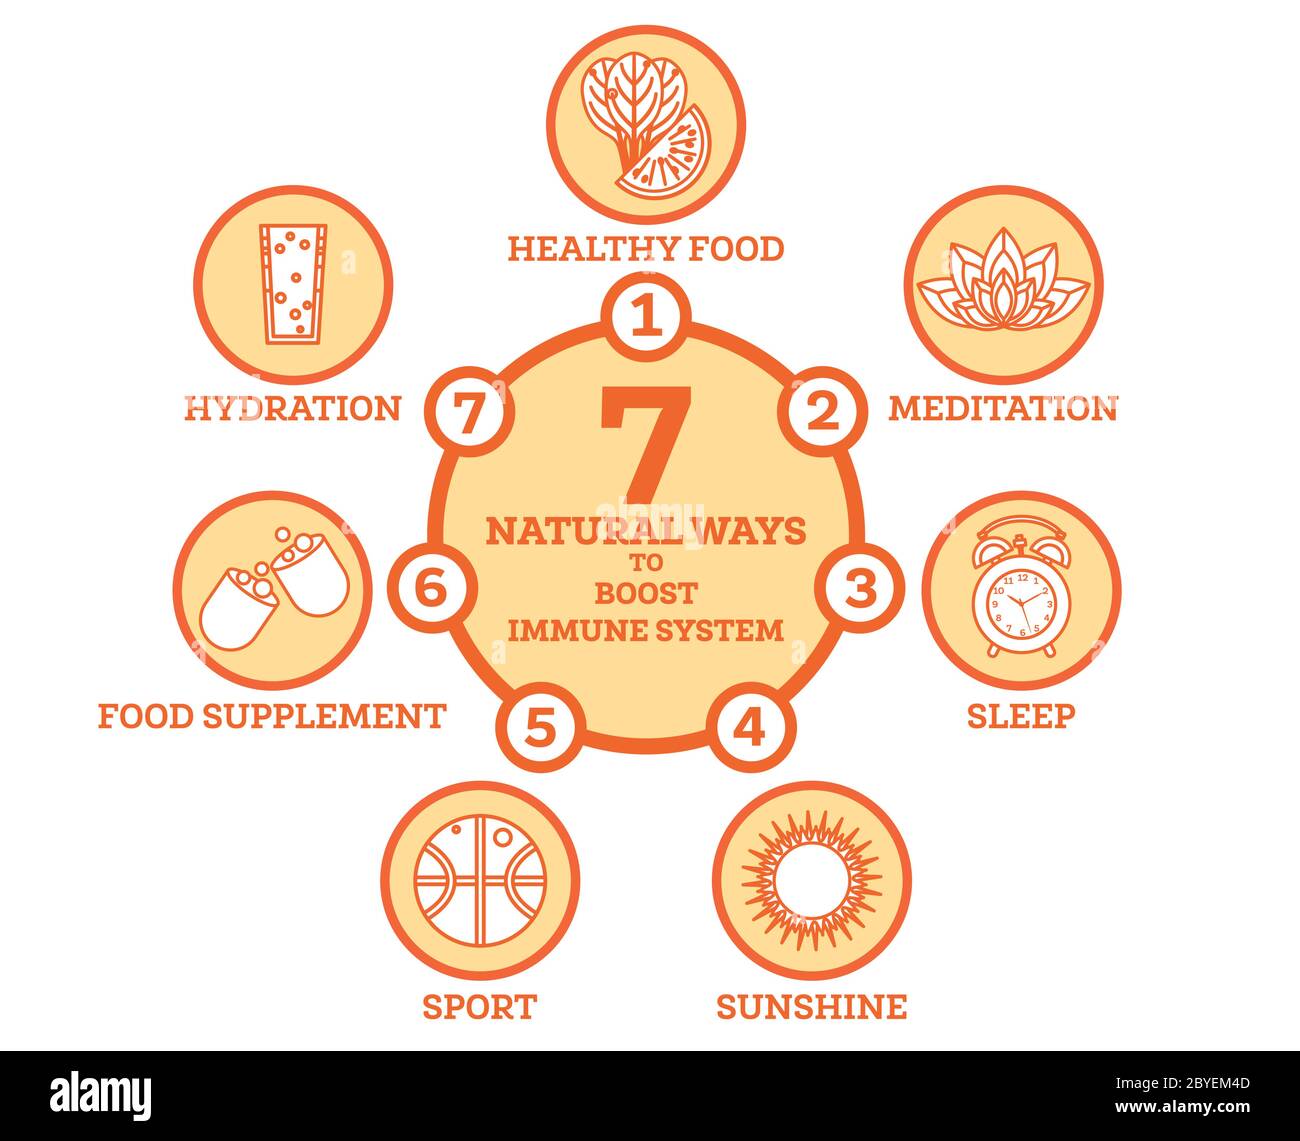 How to Boost Your Immune System. Infographic Elements. Vector Illustration. Healthy Habits Against Respiratoty Diseases and Viruses. Stock Vector